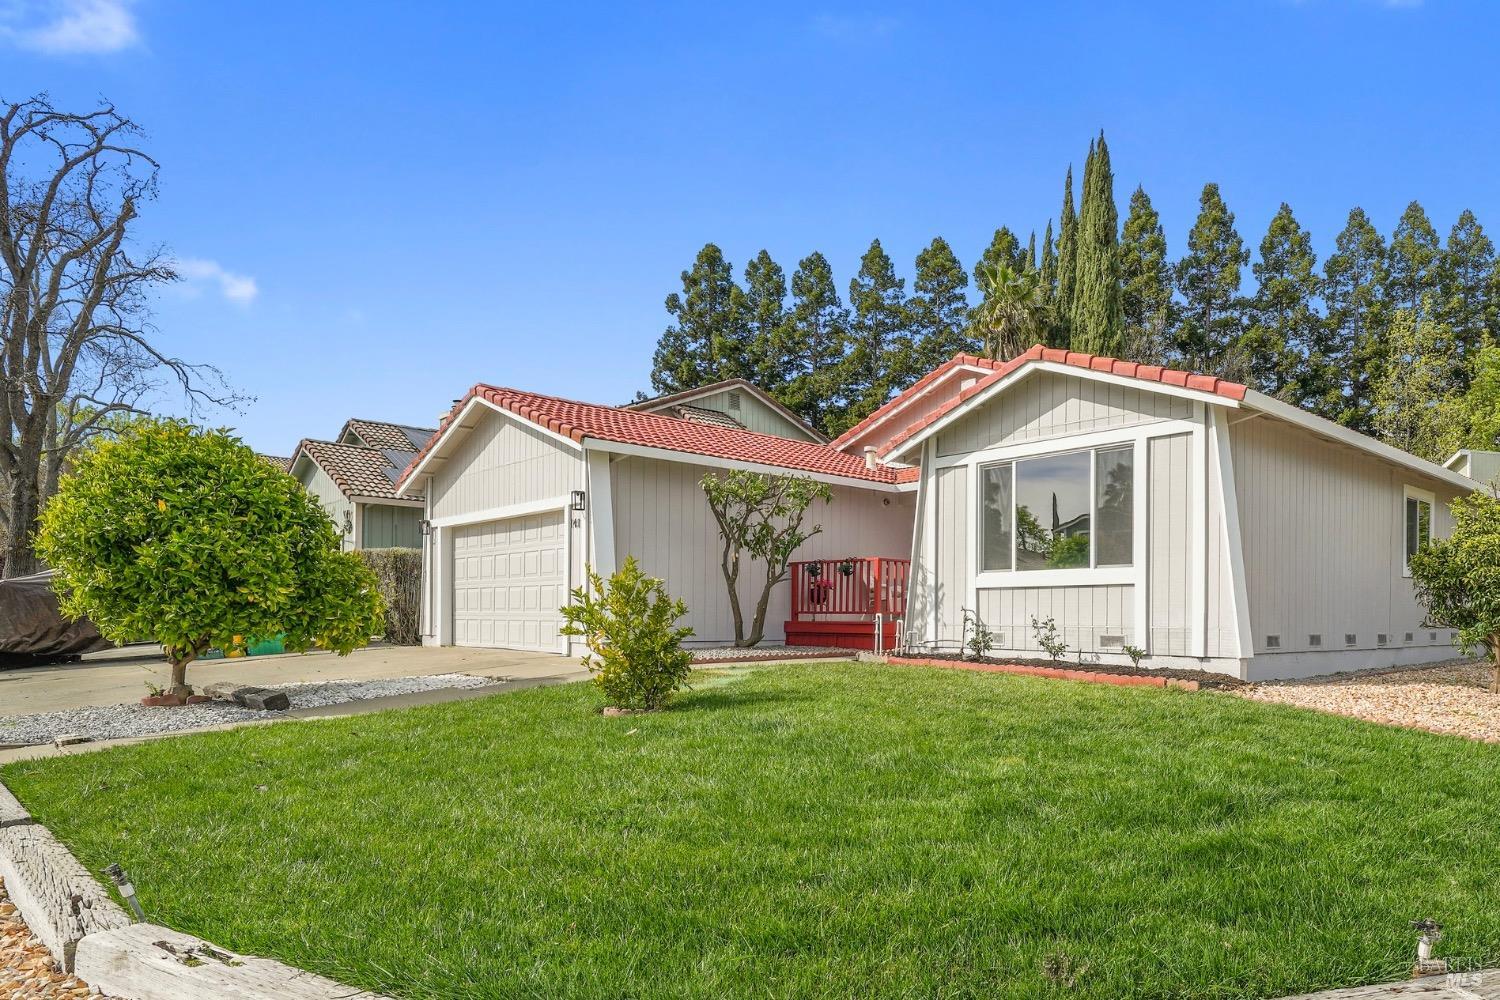 Photo of 141 Stirling Dr in Vacaville, CA